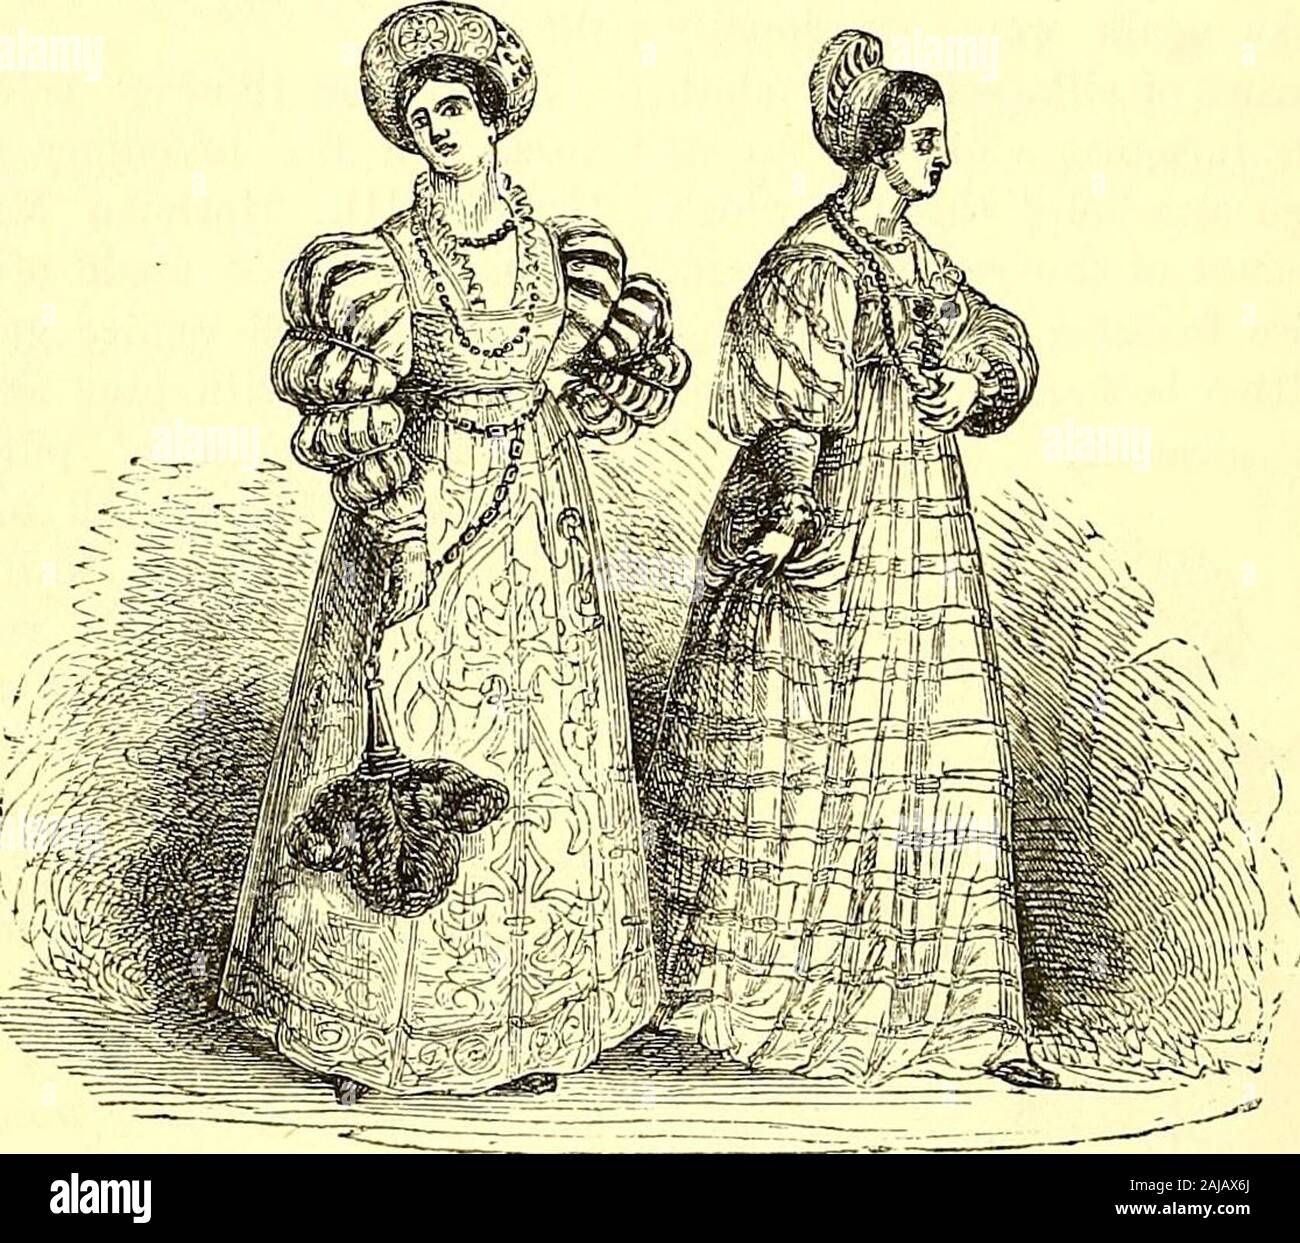 The comedies, histories, tragedies, and poems of William Shakspere . of a yard in depth. The sleeves were ofvelvet or other stuff, lai-ge and slashed, so as toshow the lining or under garment, terminatingwith a small band or ruffle like that round theedge of the collar. The body of the dress wasof gold stuff or embroidery. Some of thedresses were made with trains, which wereeither held up with the hand when walking, orattached to the girdle. The head-dress of goldbrocade given in one of the plates of Vecelliois not unlike the beretta of the Doge of Ae-nice; and caps very similar in form and ma Stock Photo